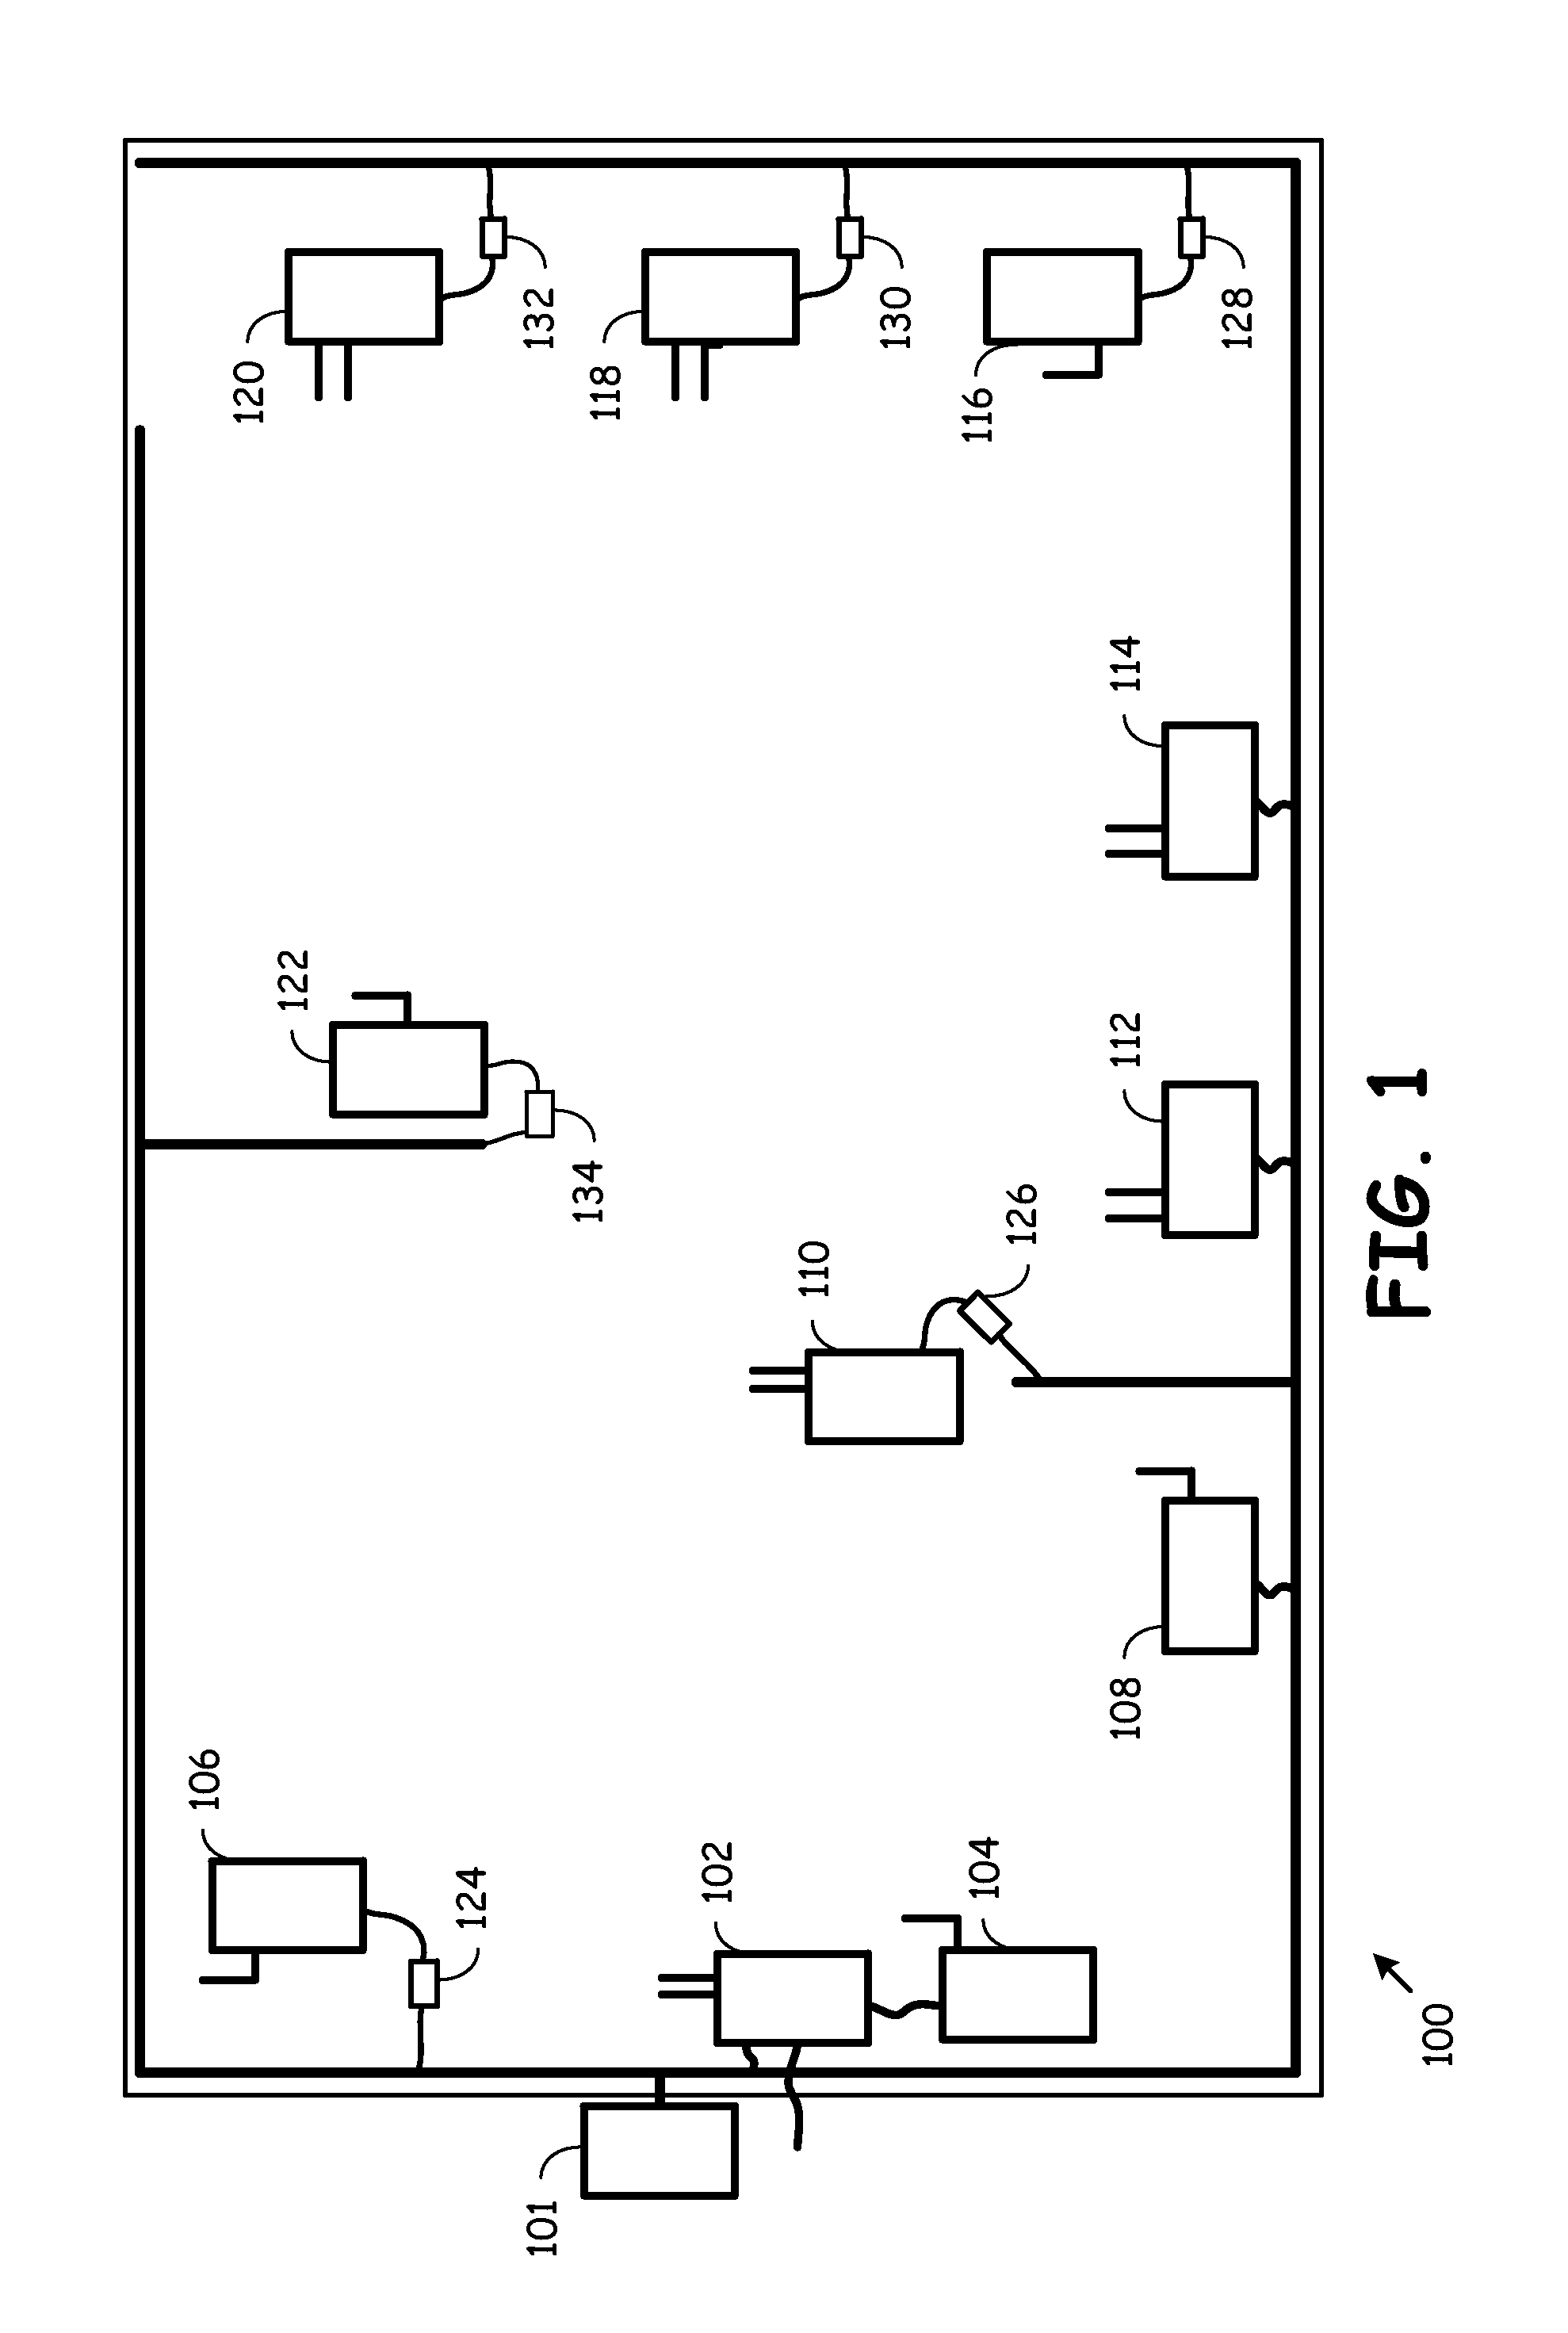 Powerline communication device supporting secure data exchange